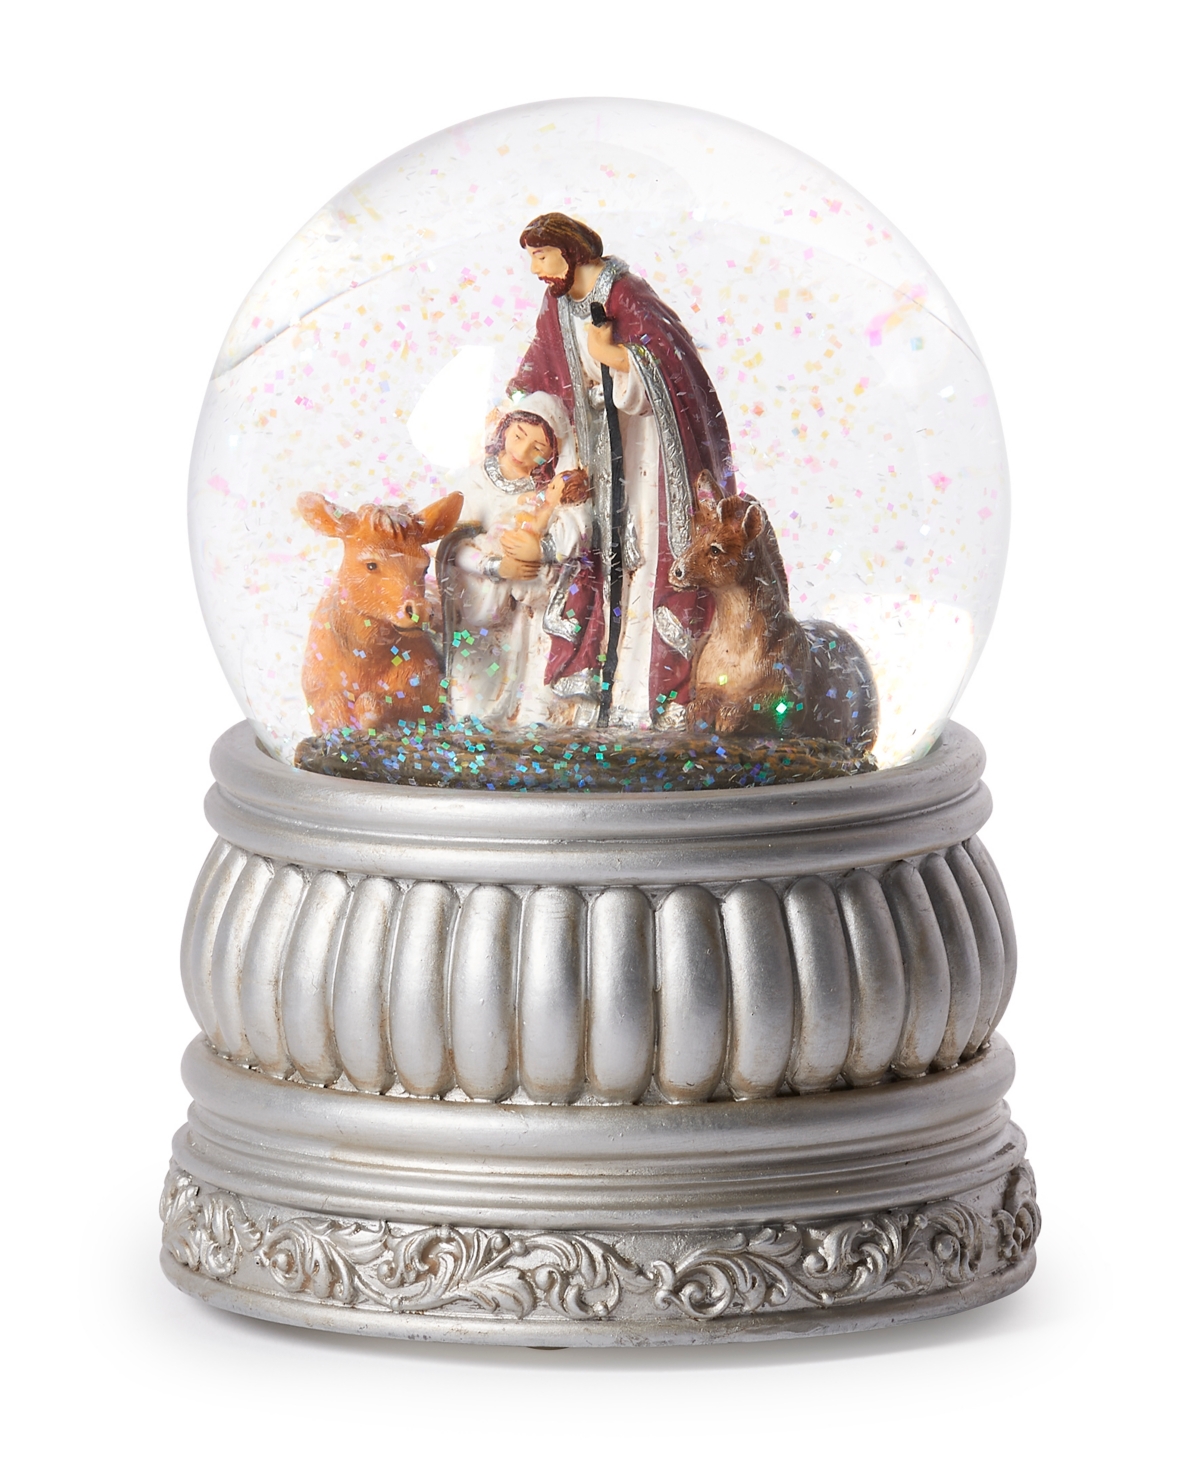 5.75" H Musical Swirl Dome with Holy - Multi Color